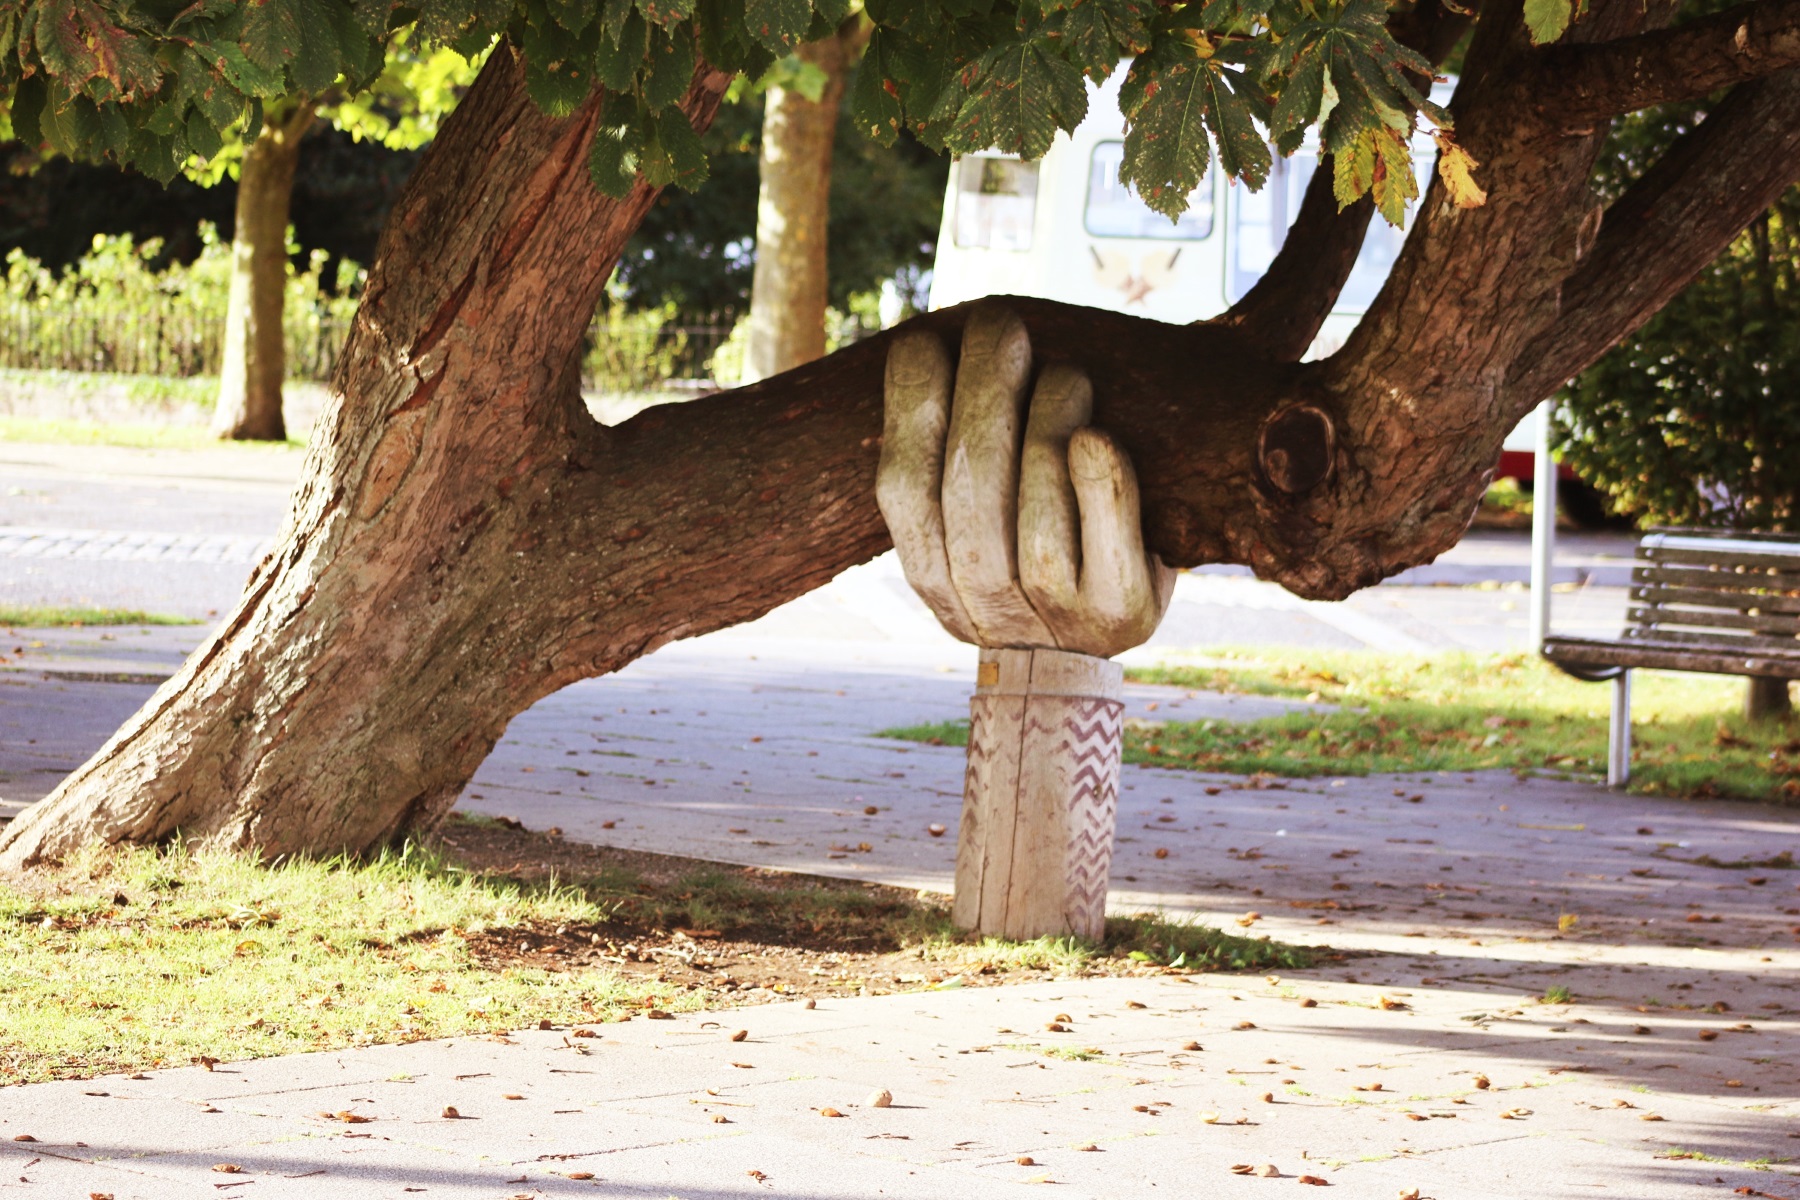 Statue of an arm holding a tree.